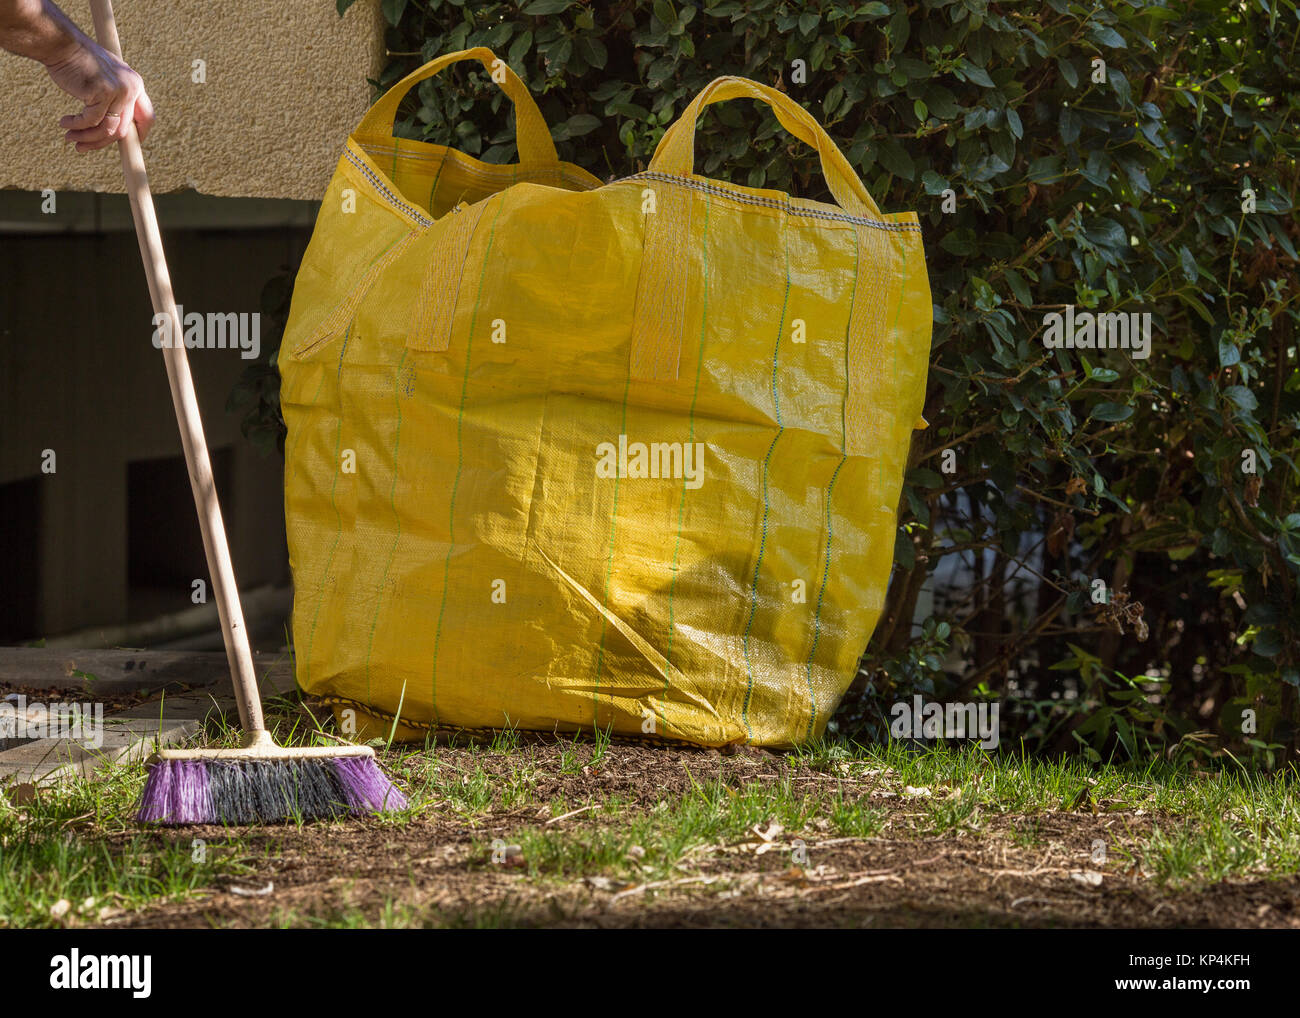 Street cleaning, cleaning in the garden - broom, trash bag Stock Photo